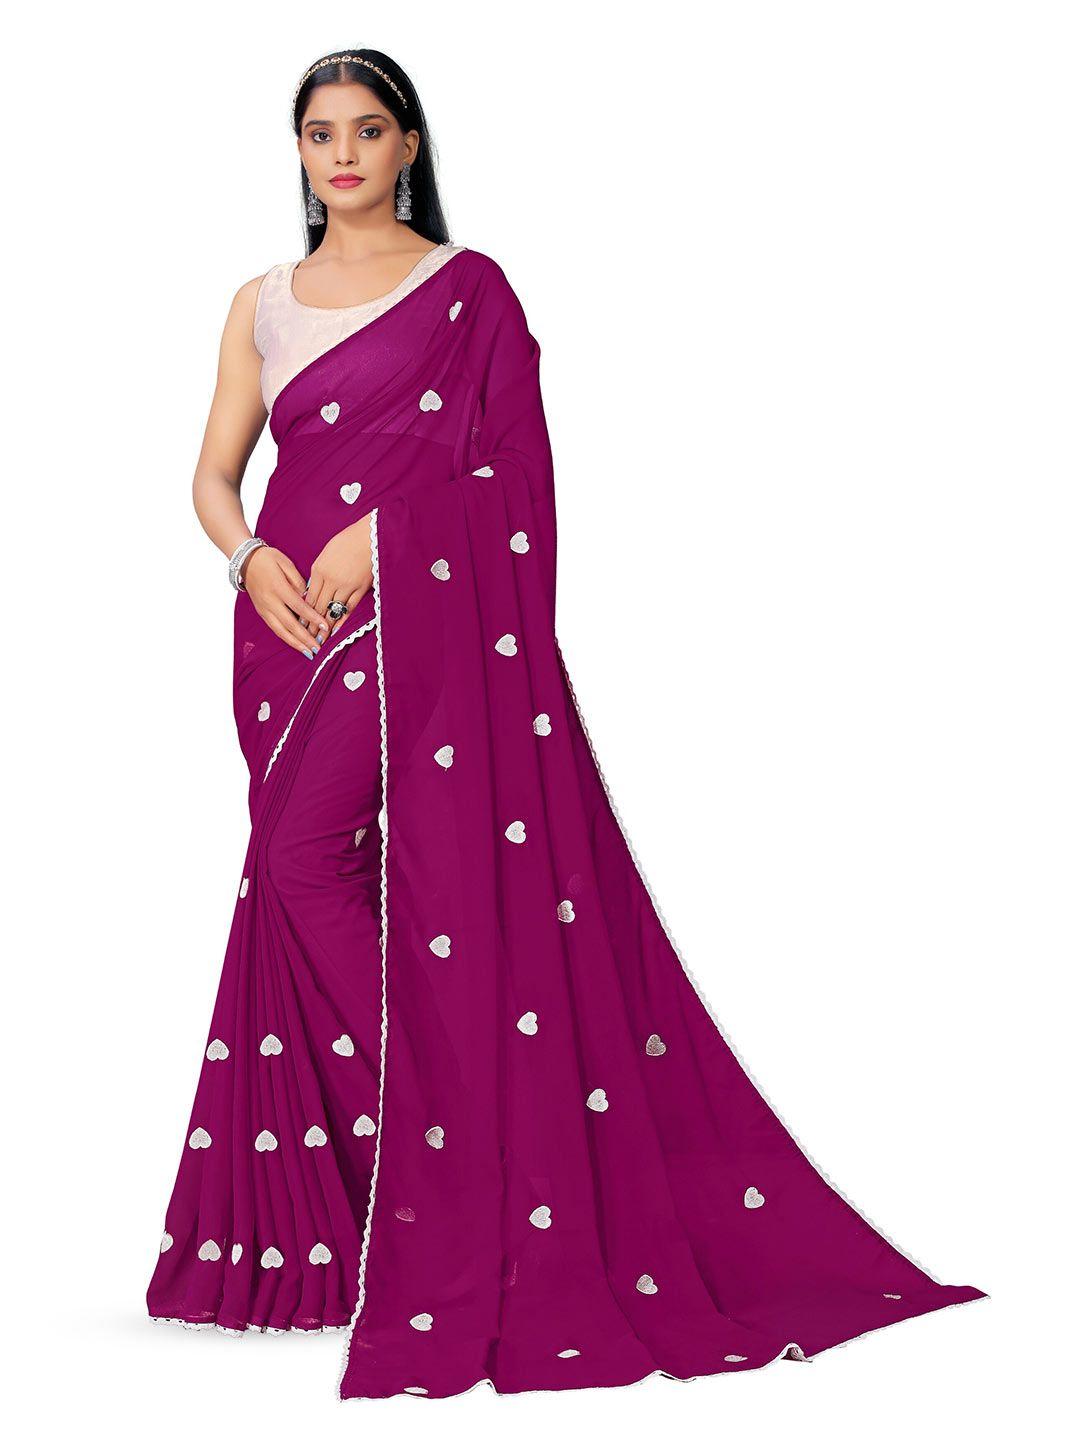 kalini purple and beige floral embroidered pure georgette fusion saree